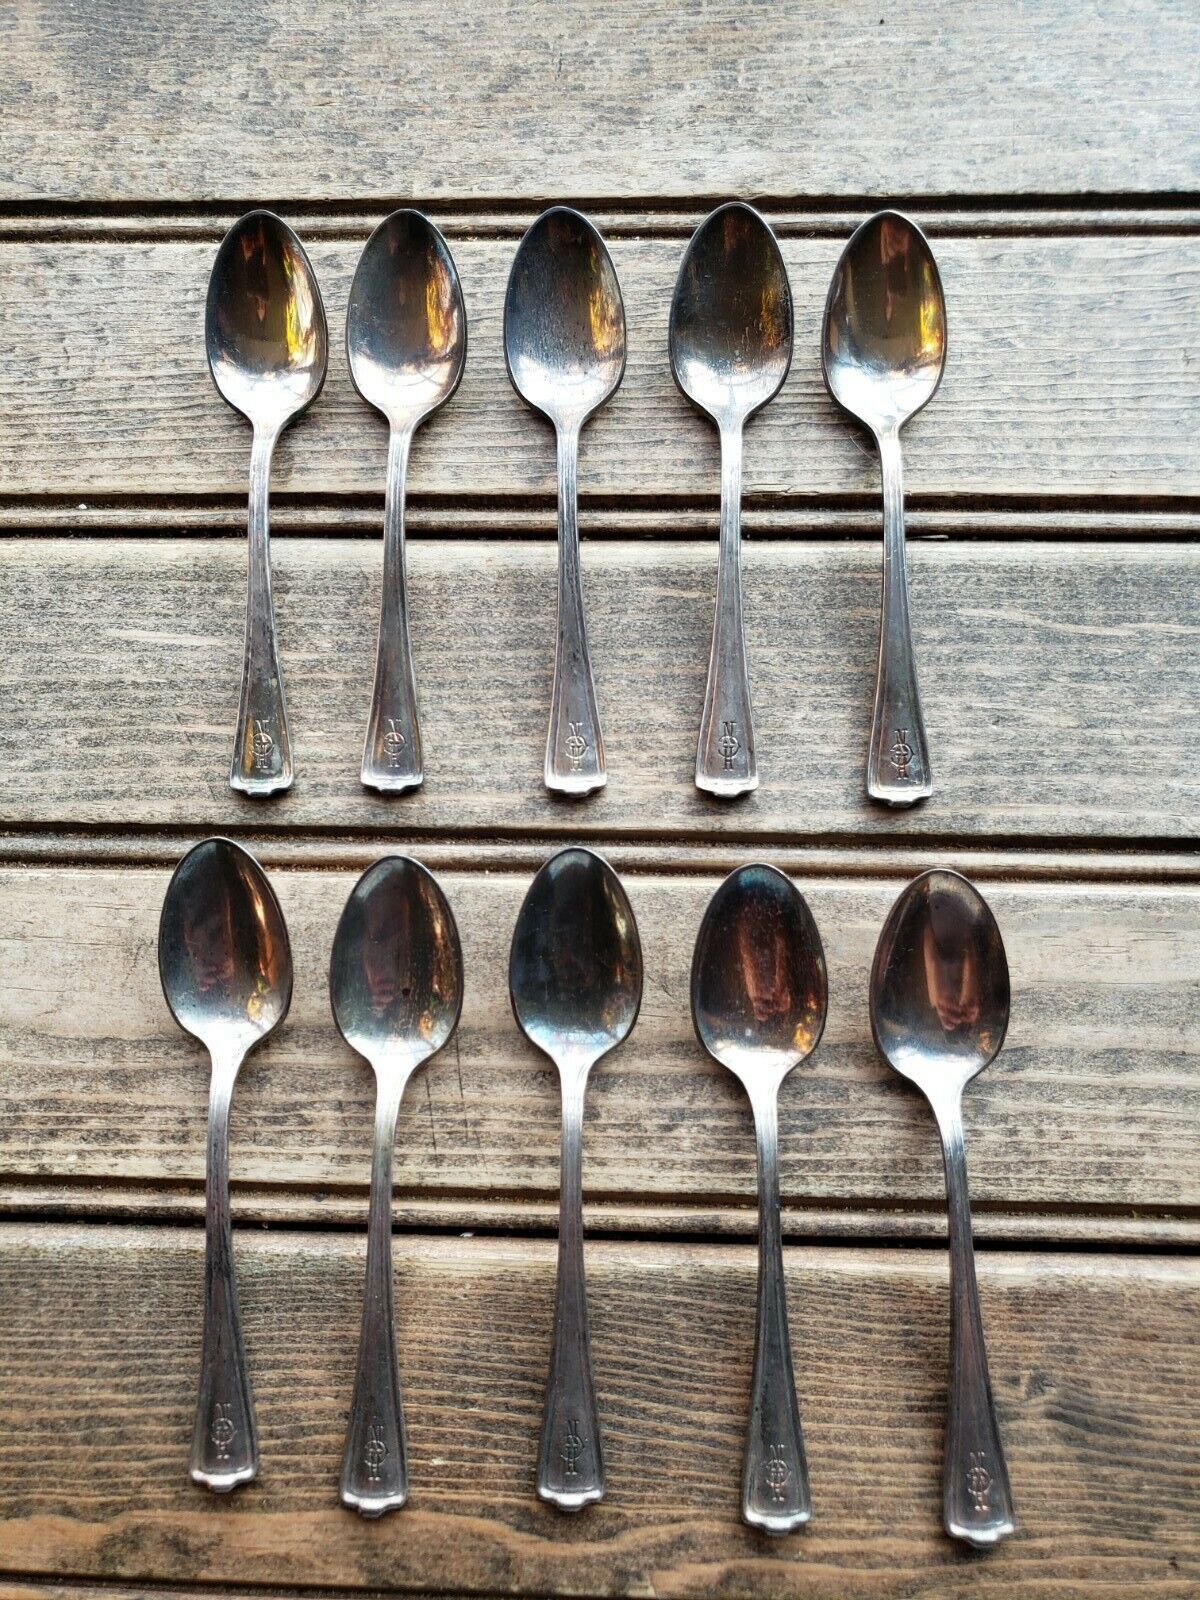 Rare Vintage Lot of 10 High Noon Club Chicago Silverware Spoons LS Co.